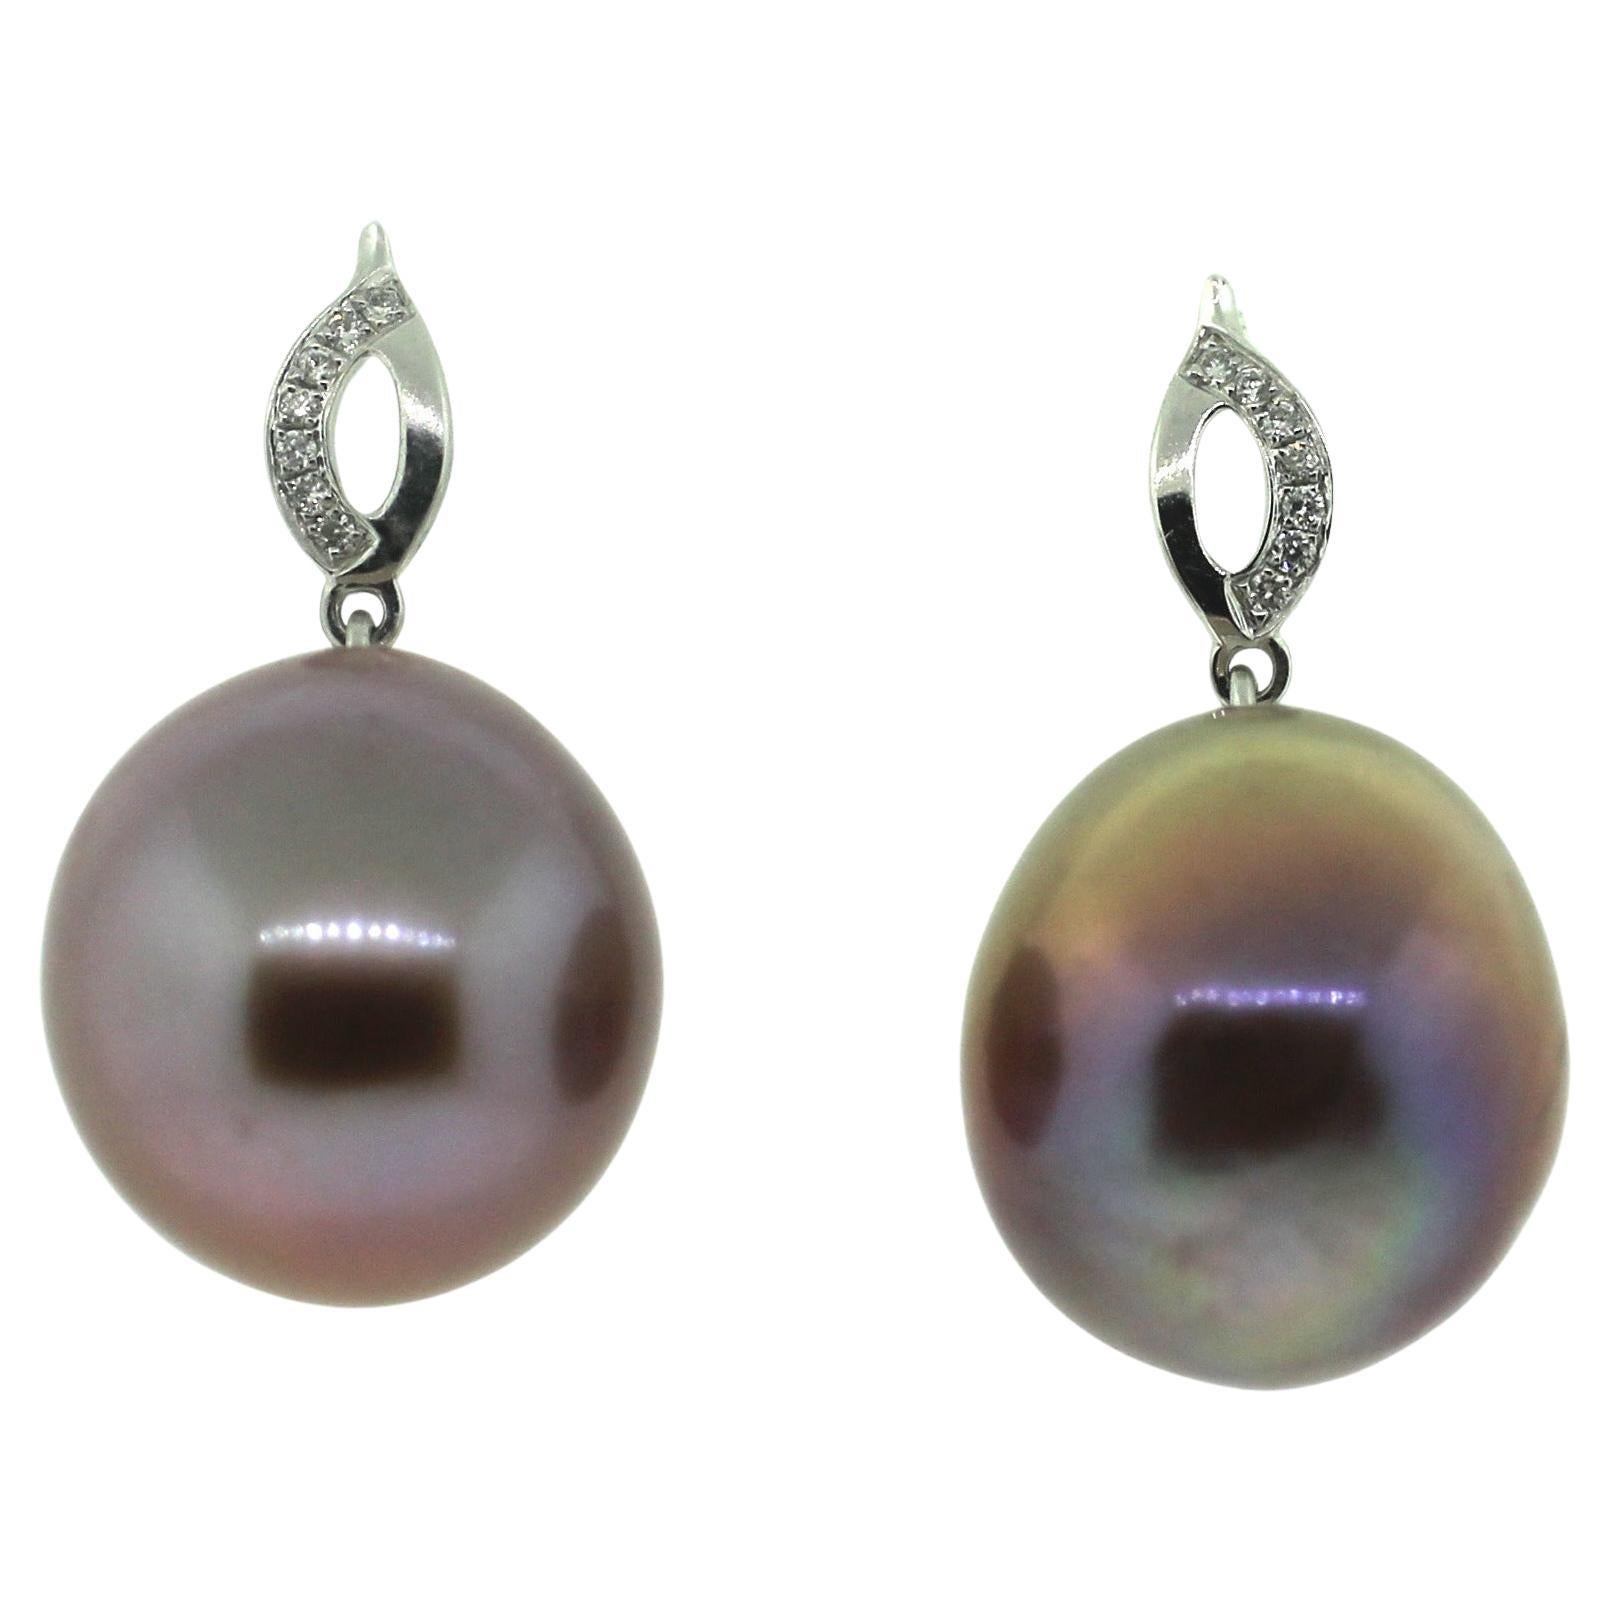 Hakimoto By Jewel Of Ocean
18K White Gold and Diamond 
Natural Color Drop Pearl Earrings
Total item weight 7 grams
Featuring 0.03 Carats of Round Brilliant Diamonds
12=14mm South Sea Drop Cultured Pearls
18K Yellow Gold High Polish
Orient: Very